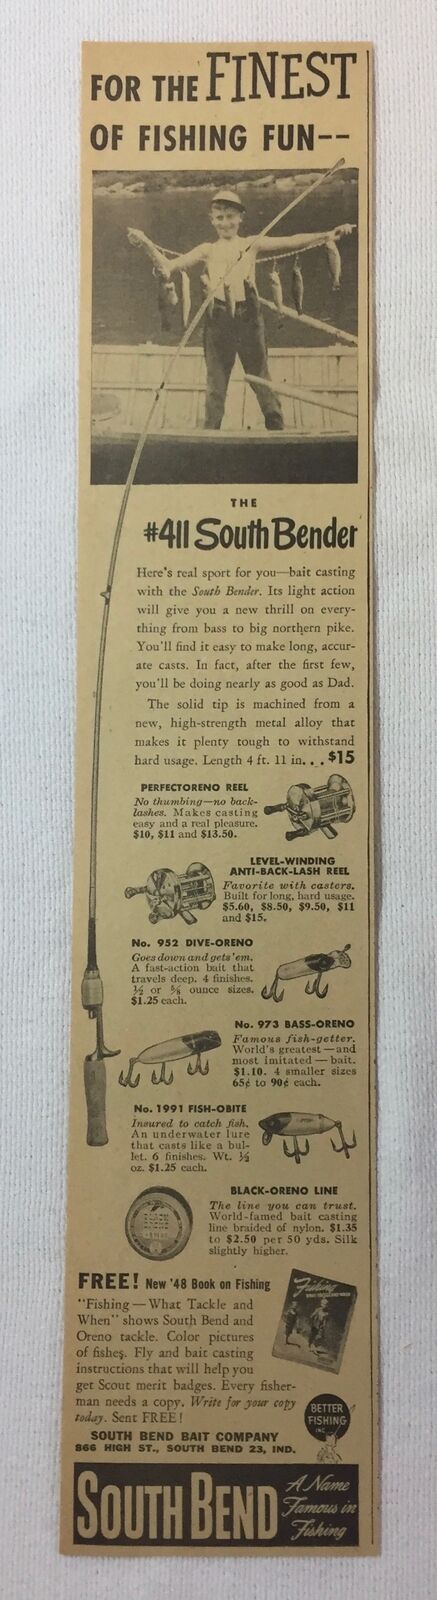 1948 South Bend Fishing Ad~south Bender,perfectoreno Reel, Several Lures, More